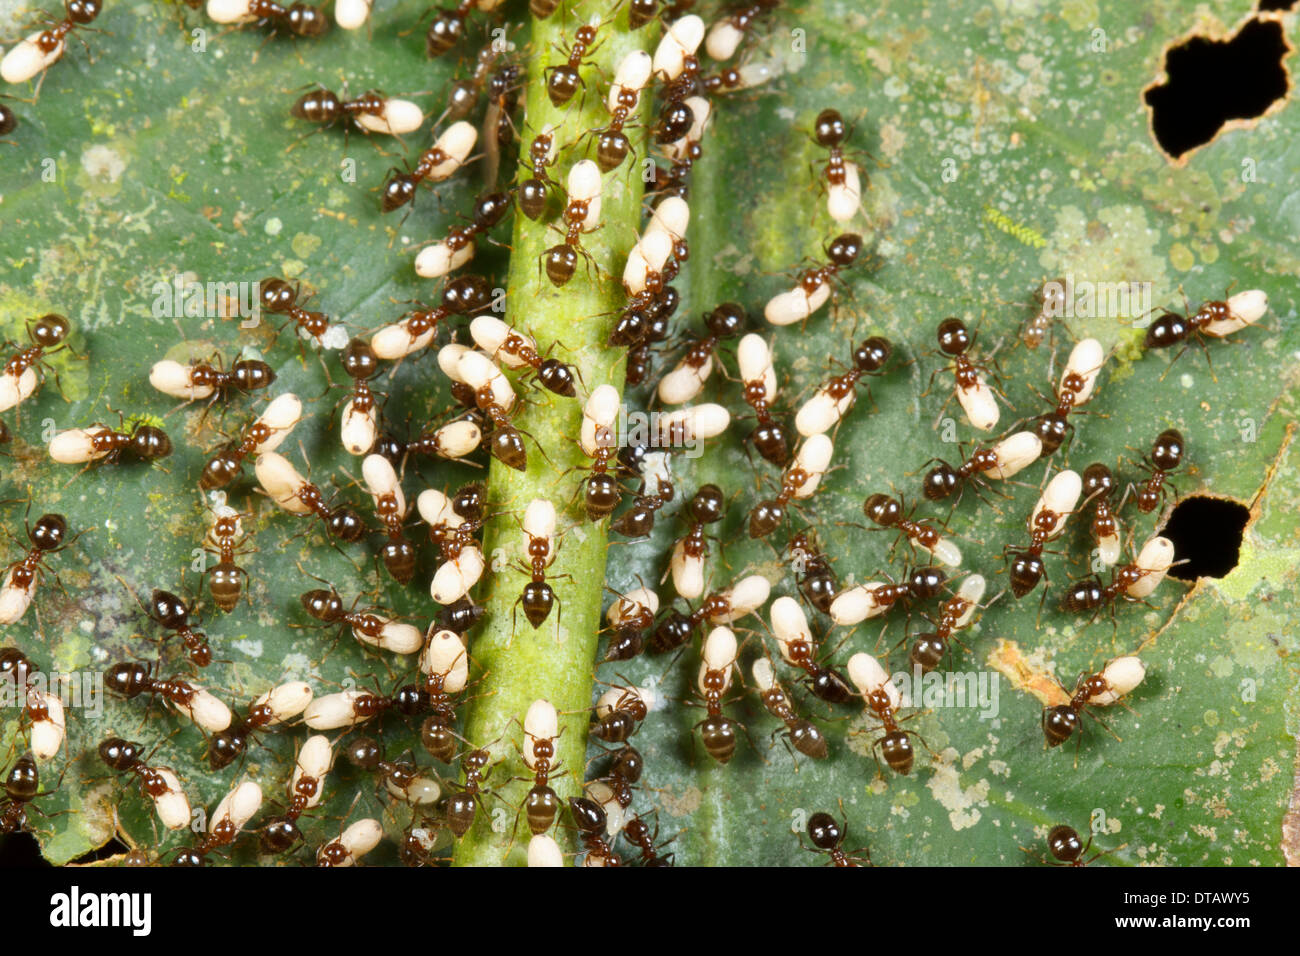 Ants carrying their larvae and pupae into the understory after their colony was attacked. In tropical rainforest, Ecuador Stock Photo